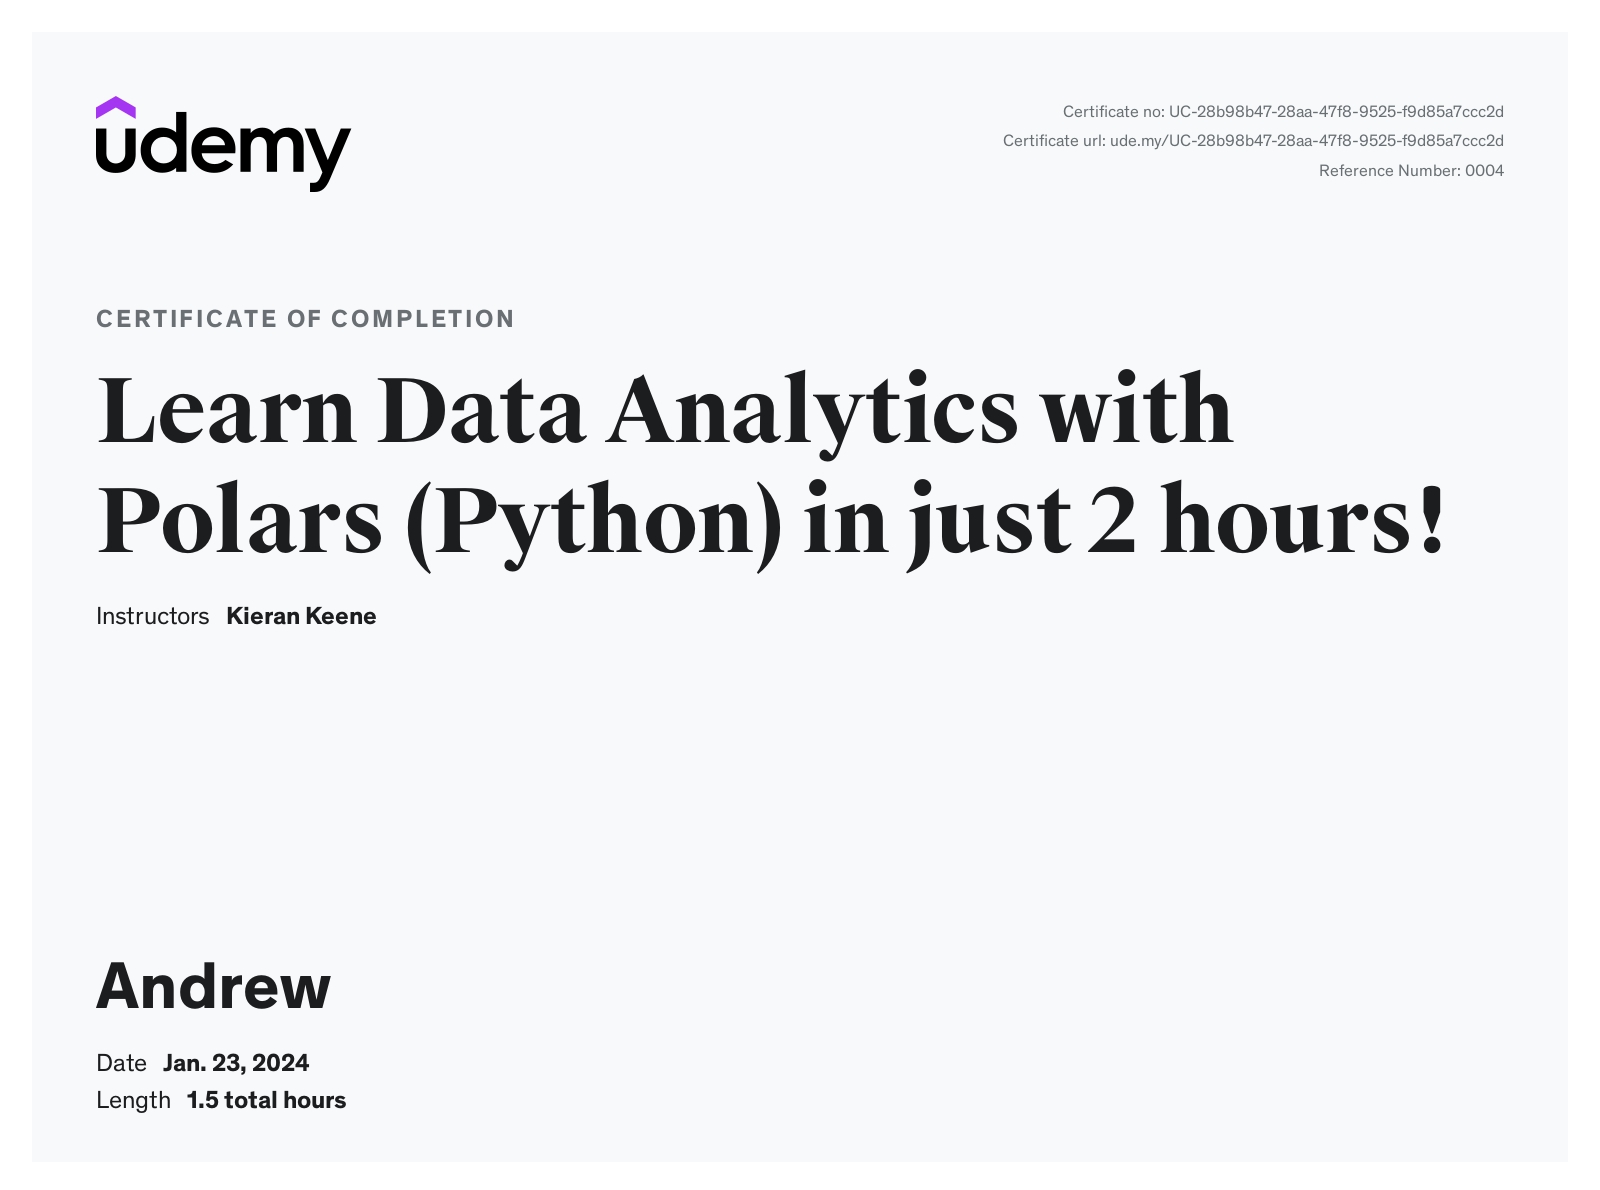 Learn Data Analytics with Polars (Python) in just 2 hours! Completion Certificate